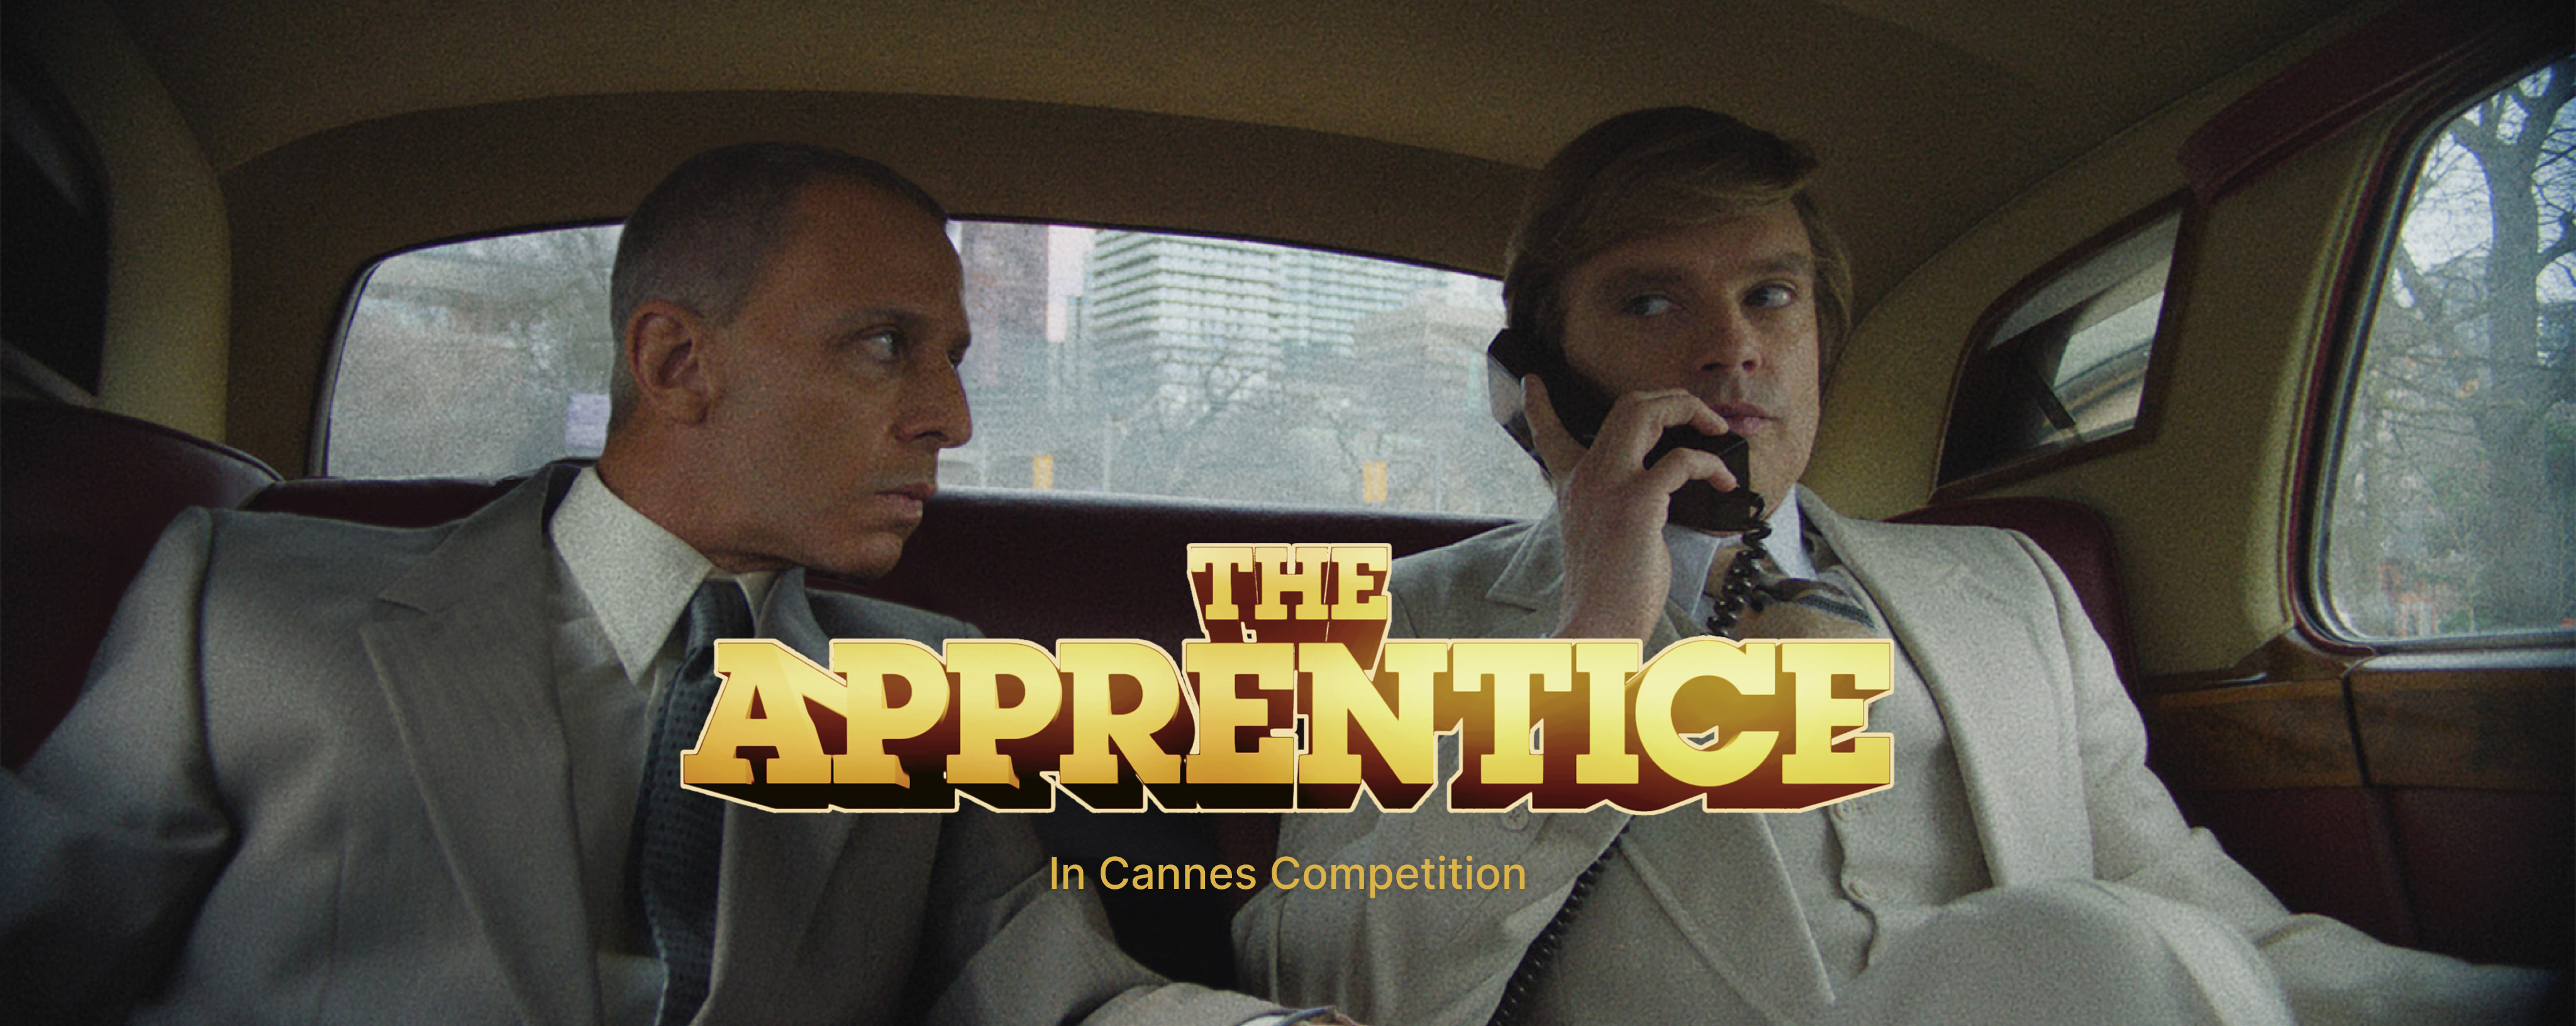 The Apprentice in Cannes competition